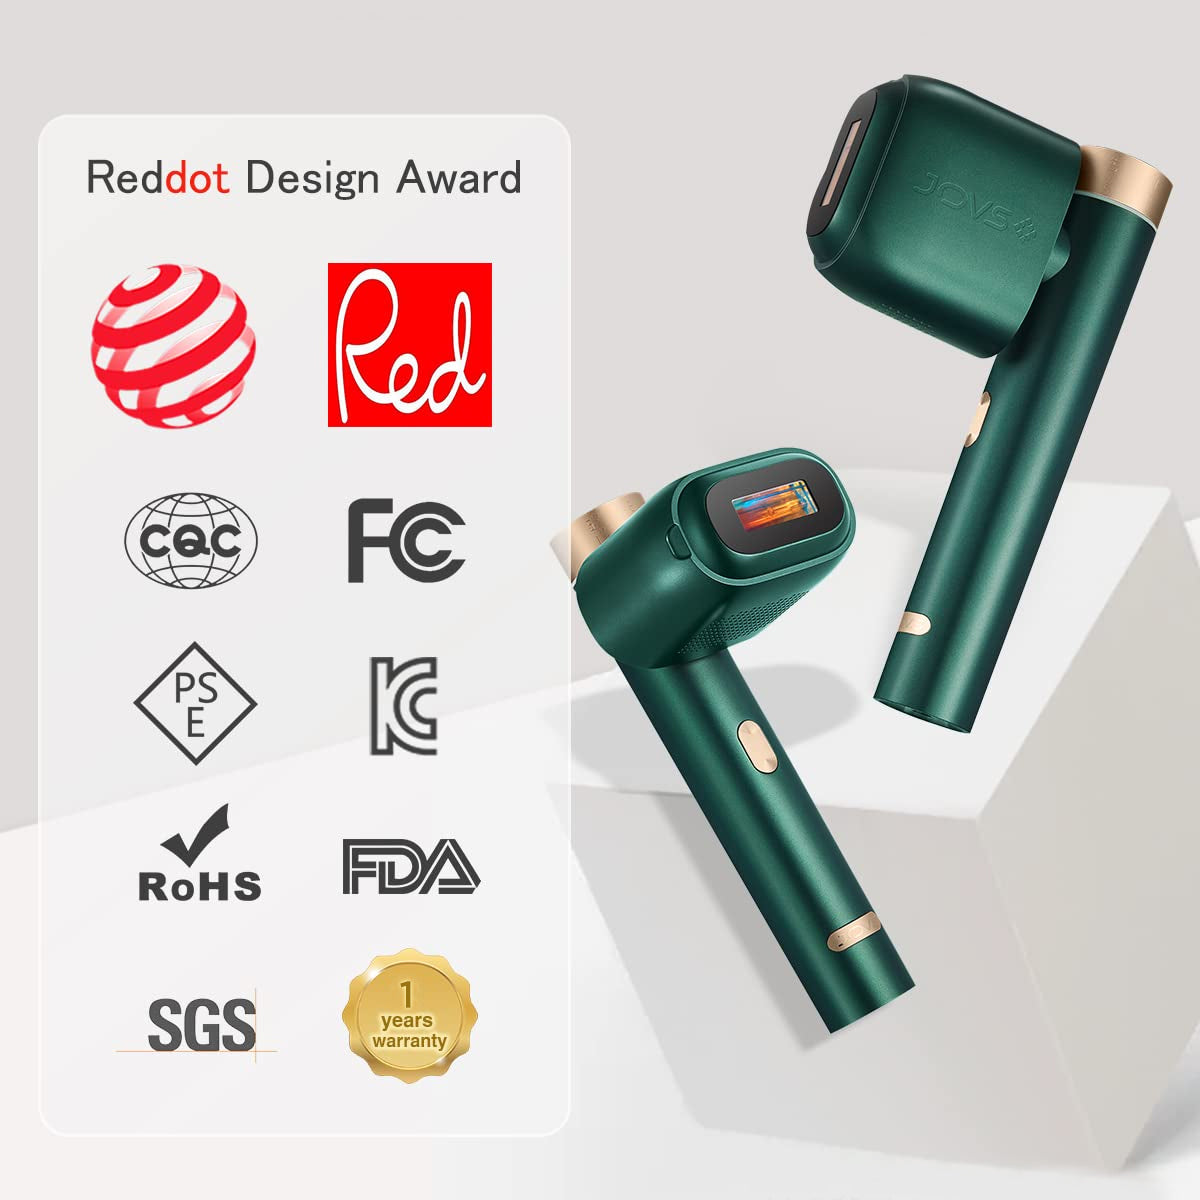 JOVS Venus Pro™ II IPL Hair Removal Device with Reddot Design Award and certifications including FCC, FDA, SGS, and more, indicating high standards of quality and design.